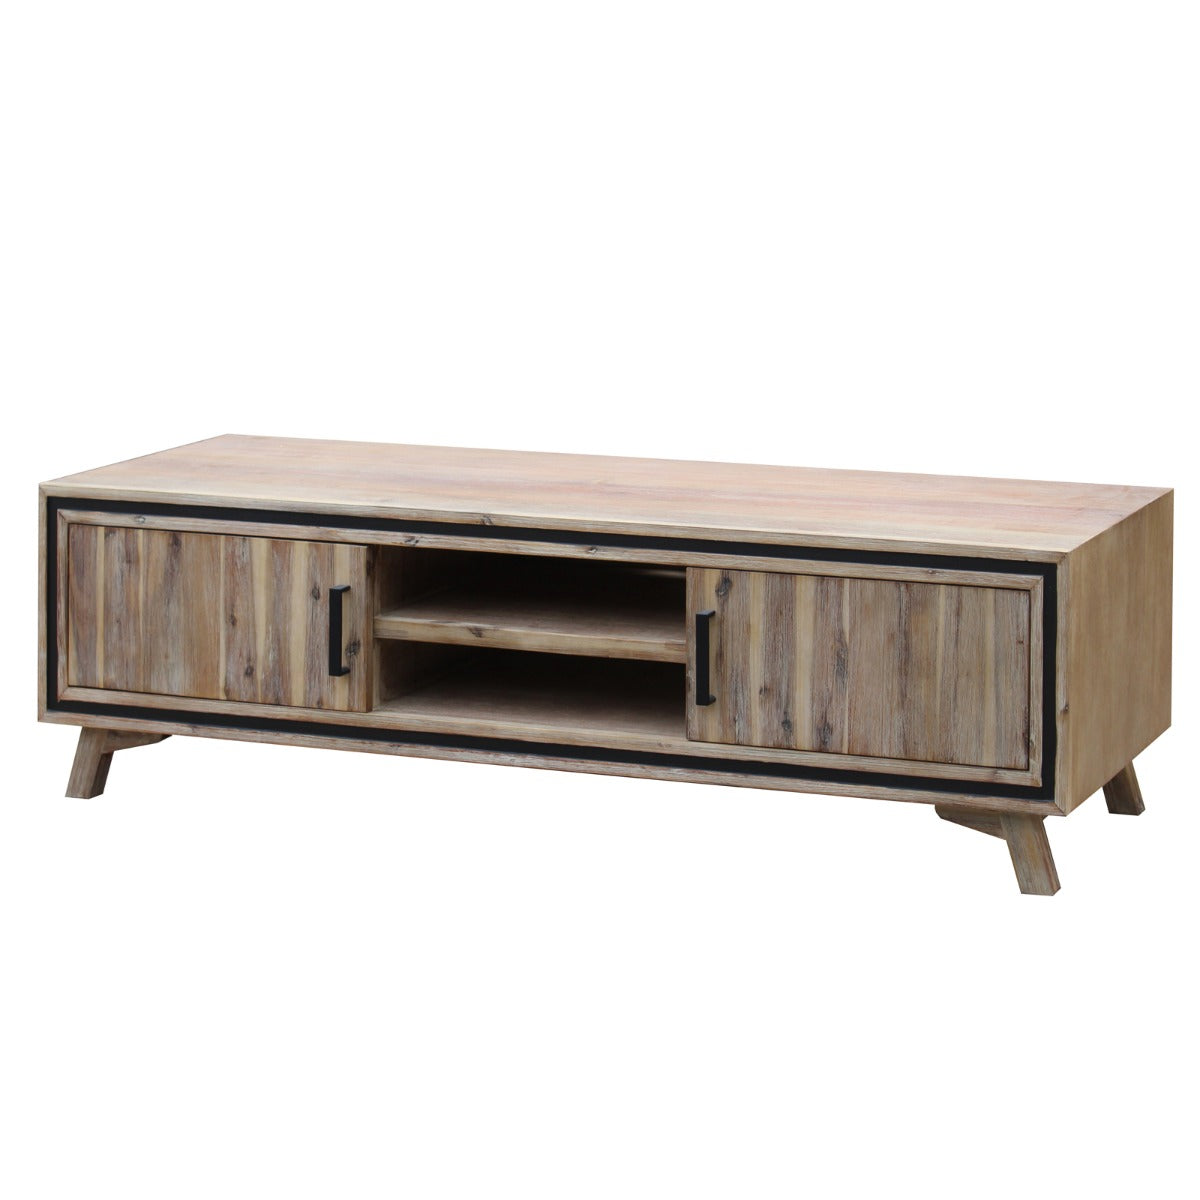 TV Cabinet with 2 Storage Drawers Cabinet Solid Acacia Wooden Entertainment Unit in Sliver Bruch Colour